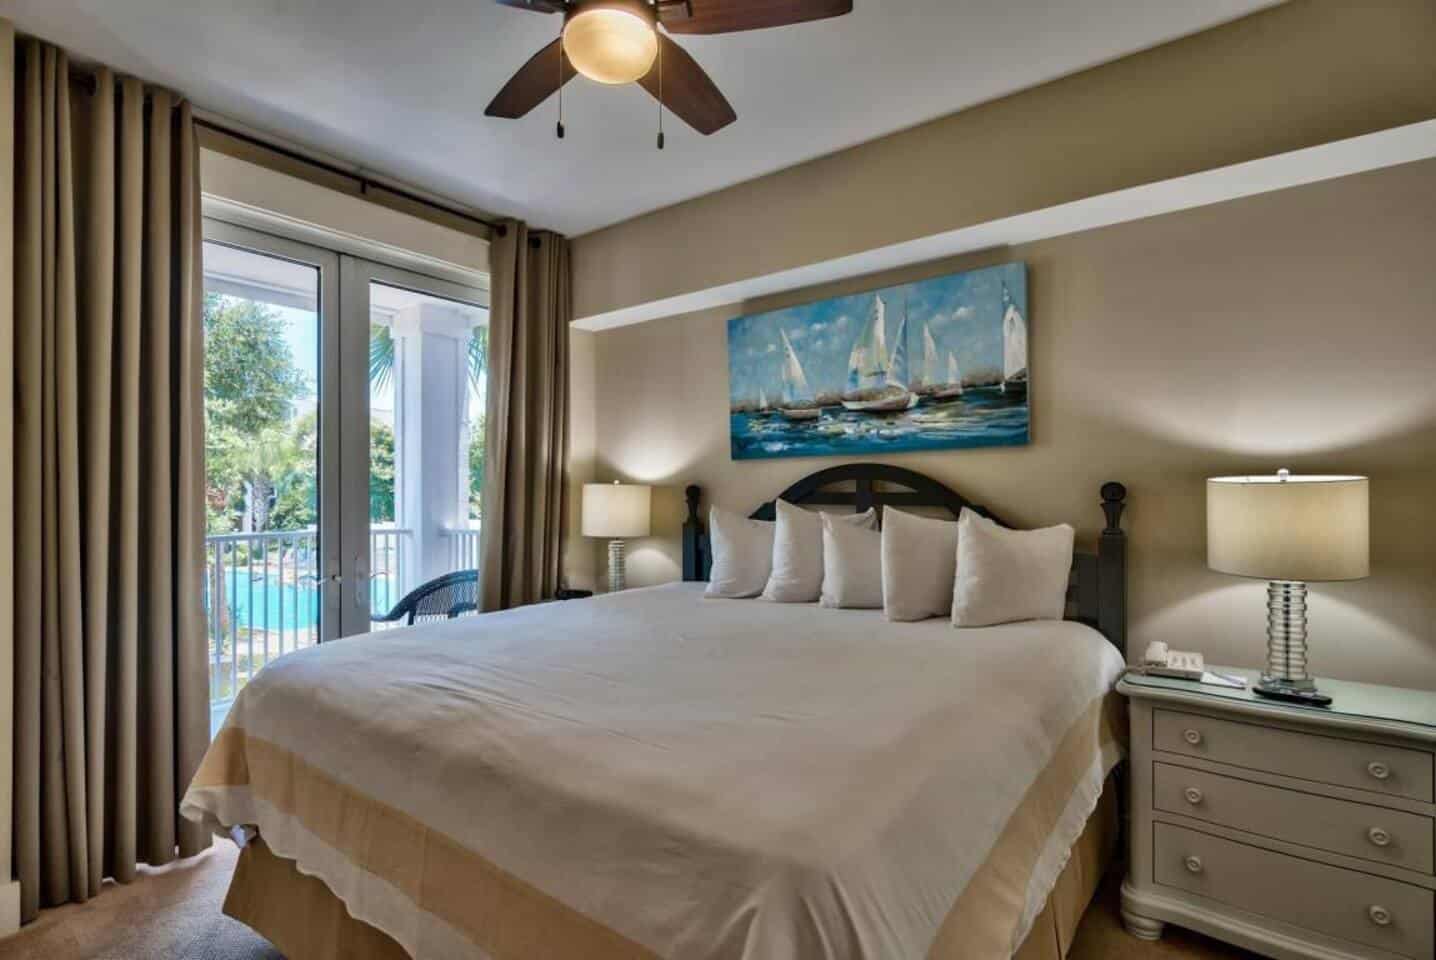 Image of Airbnb rental in Destin